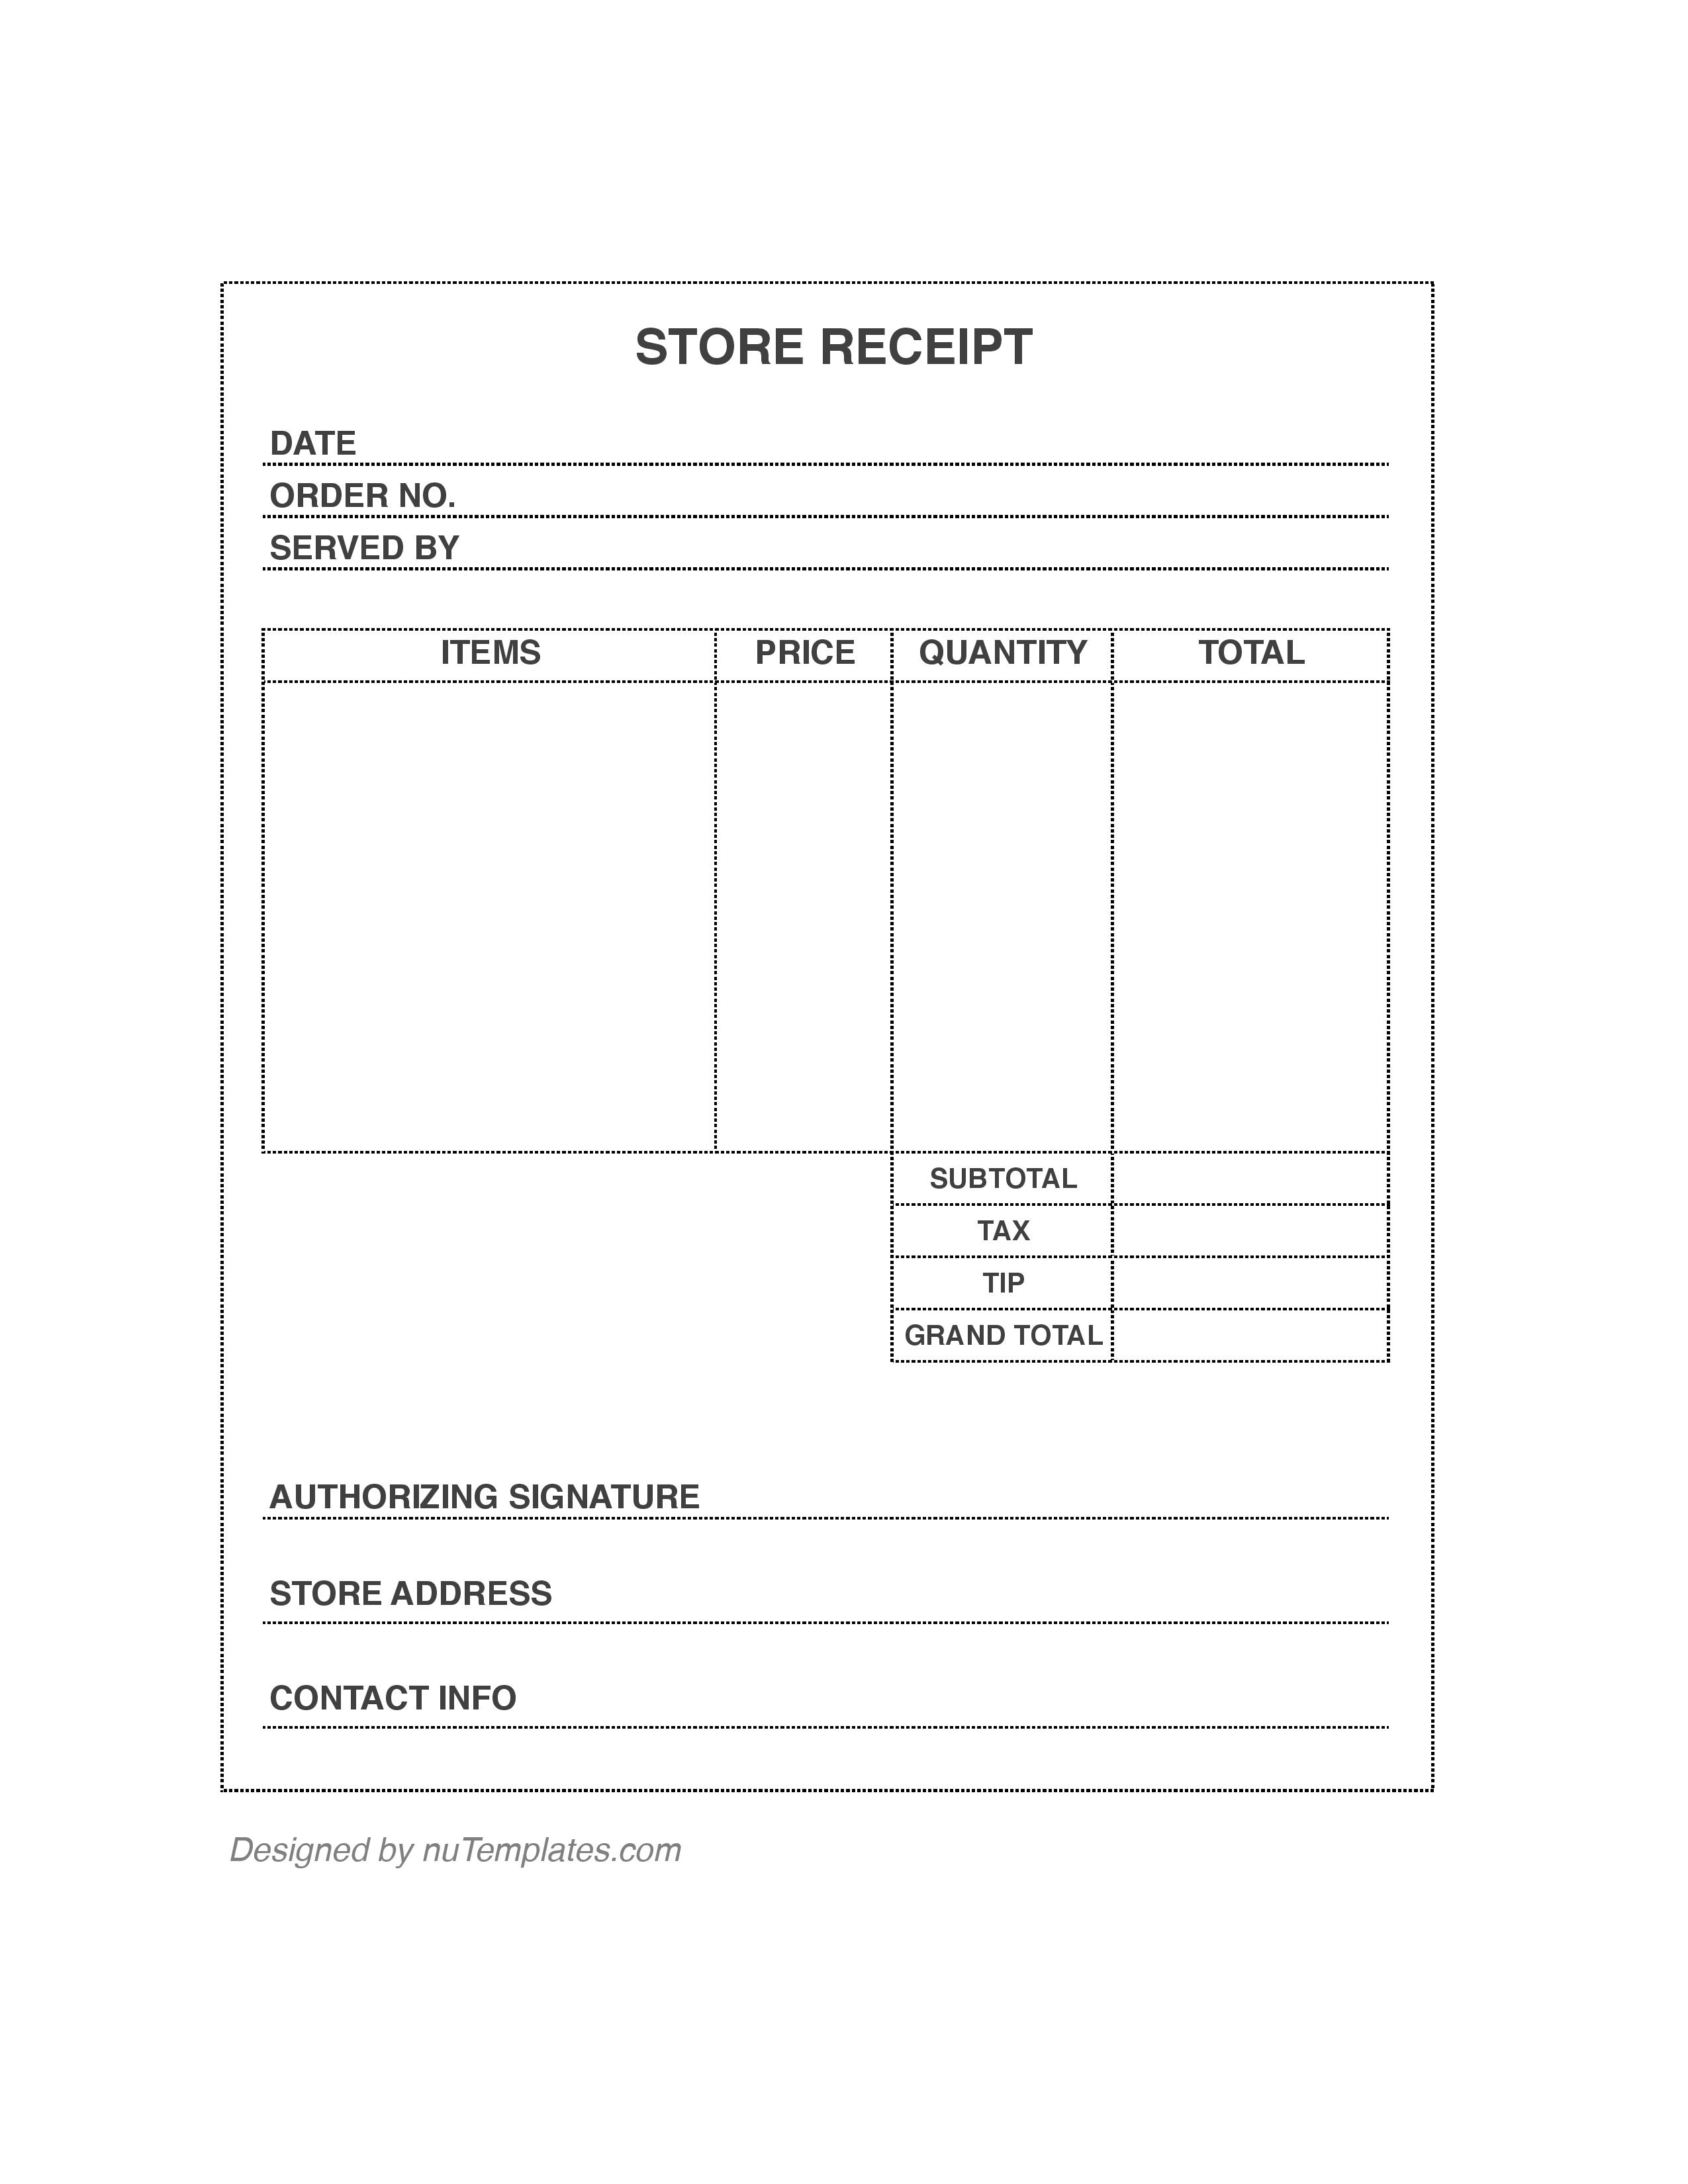 store receipt template store receipts nutemplates